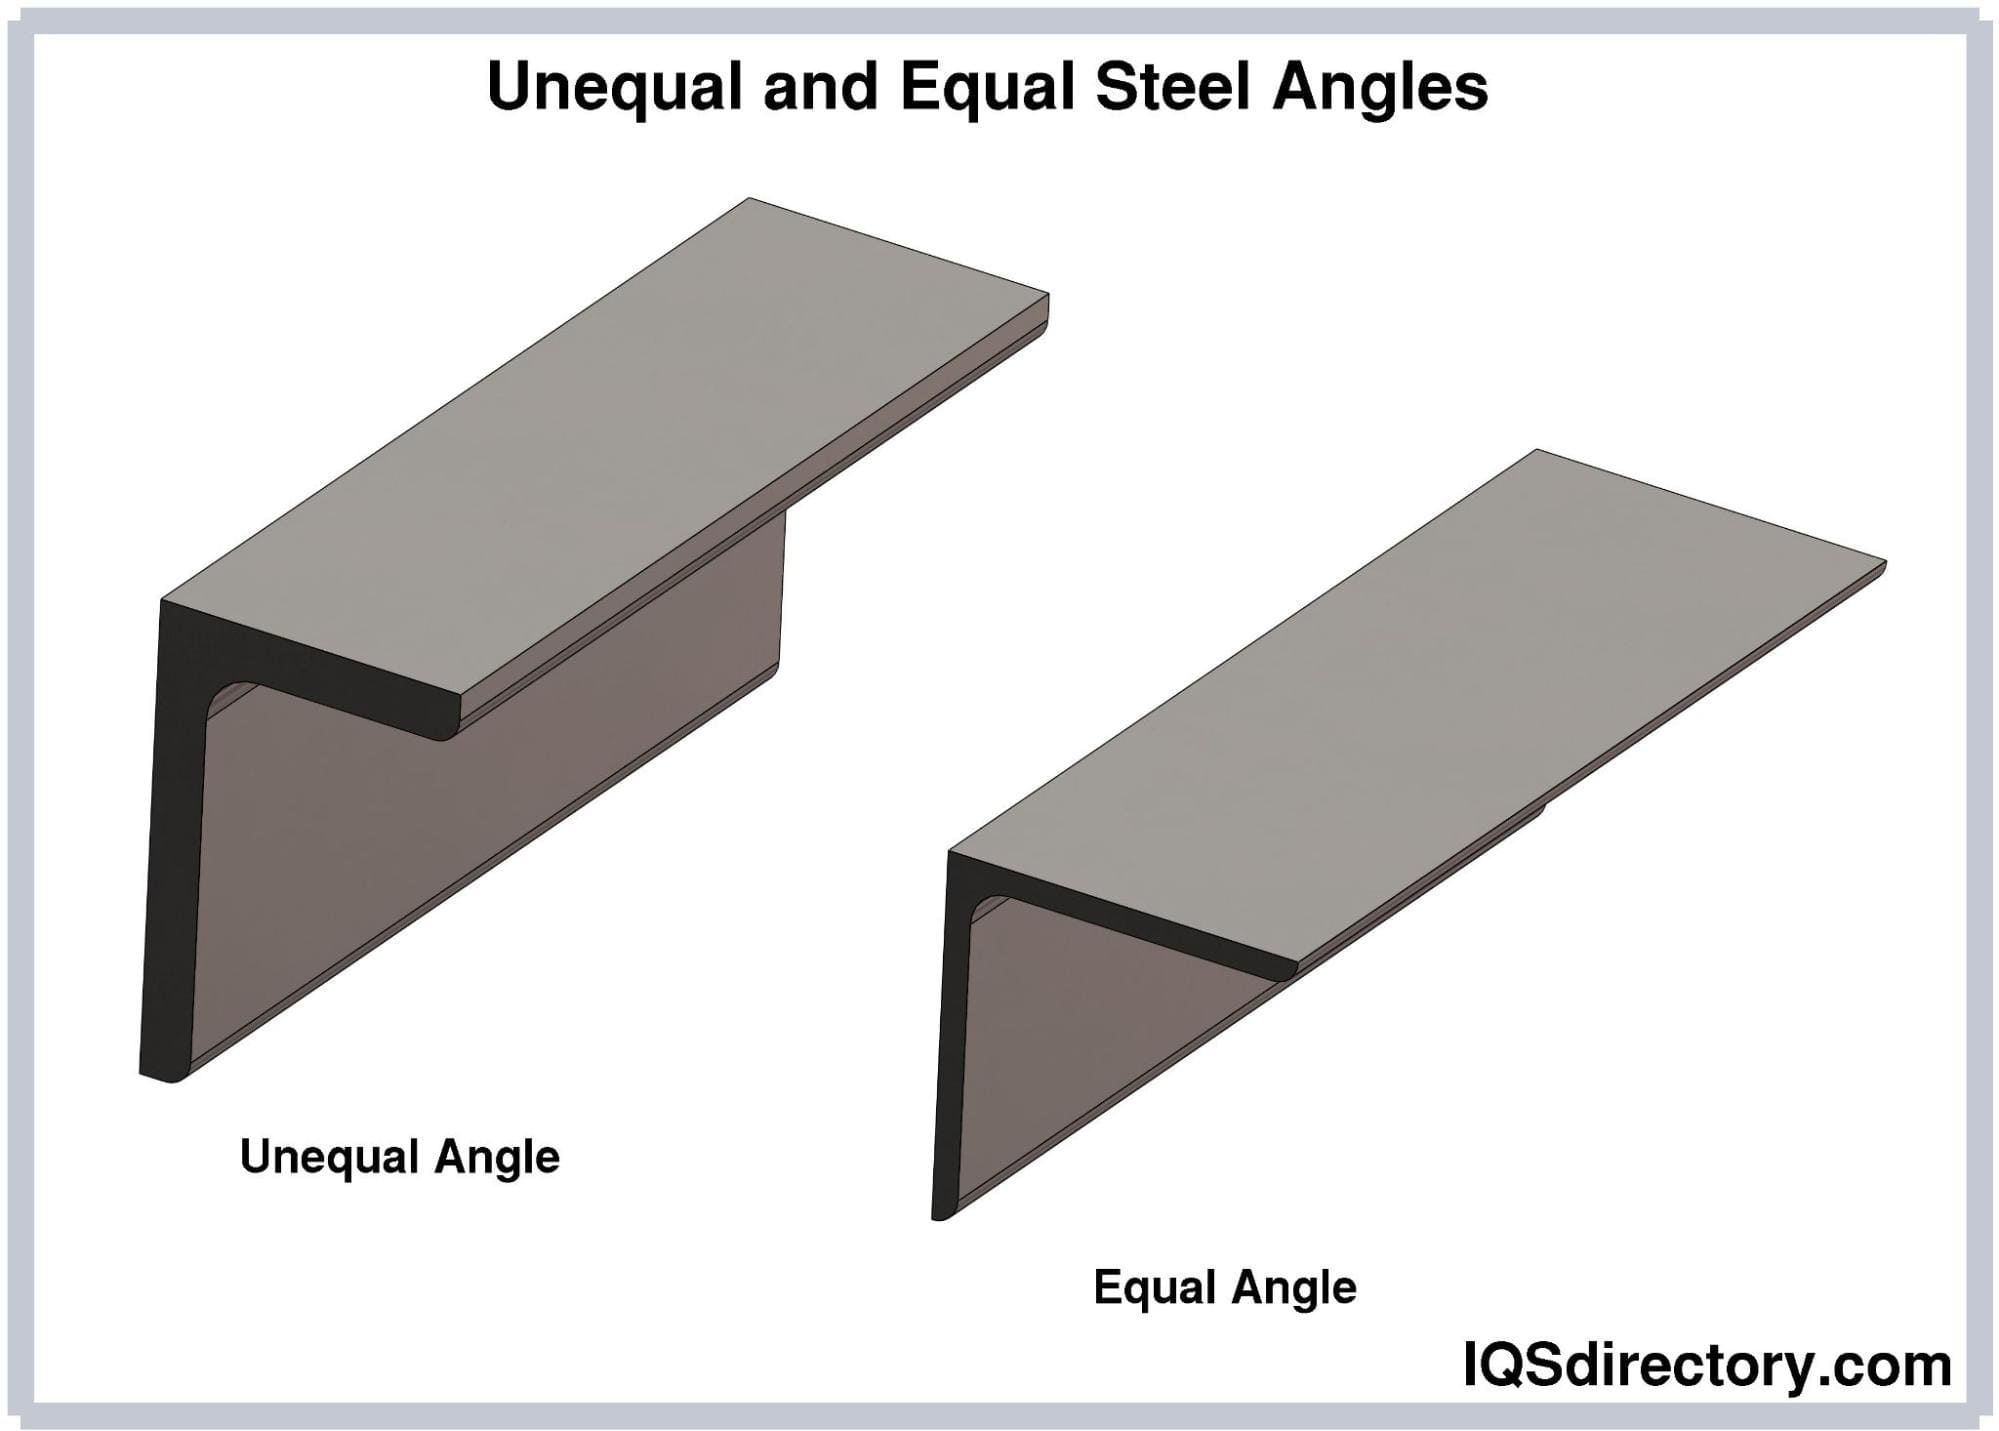 Unequal and Equal Steel Angles